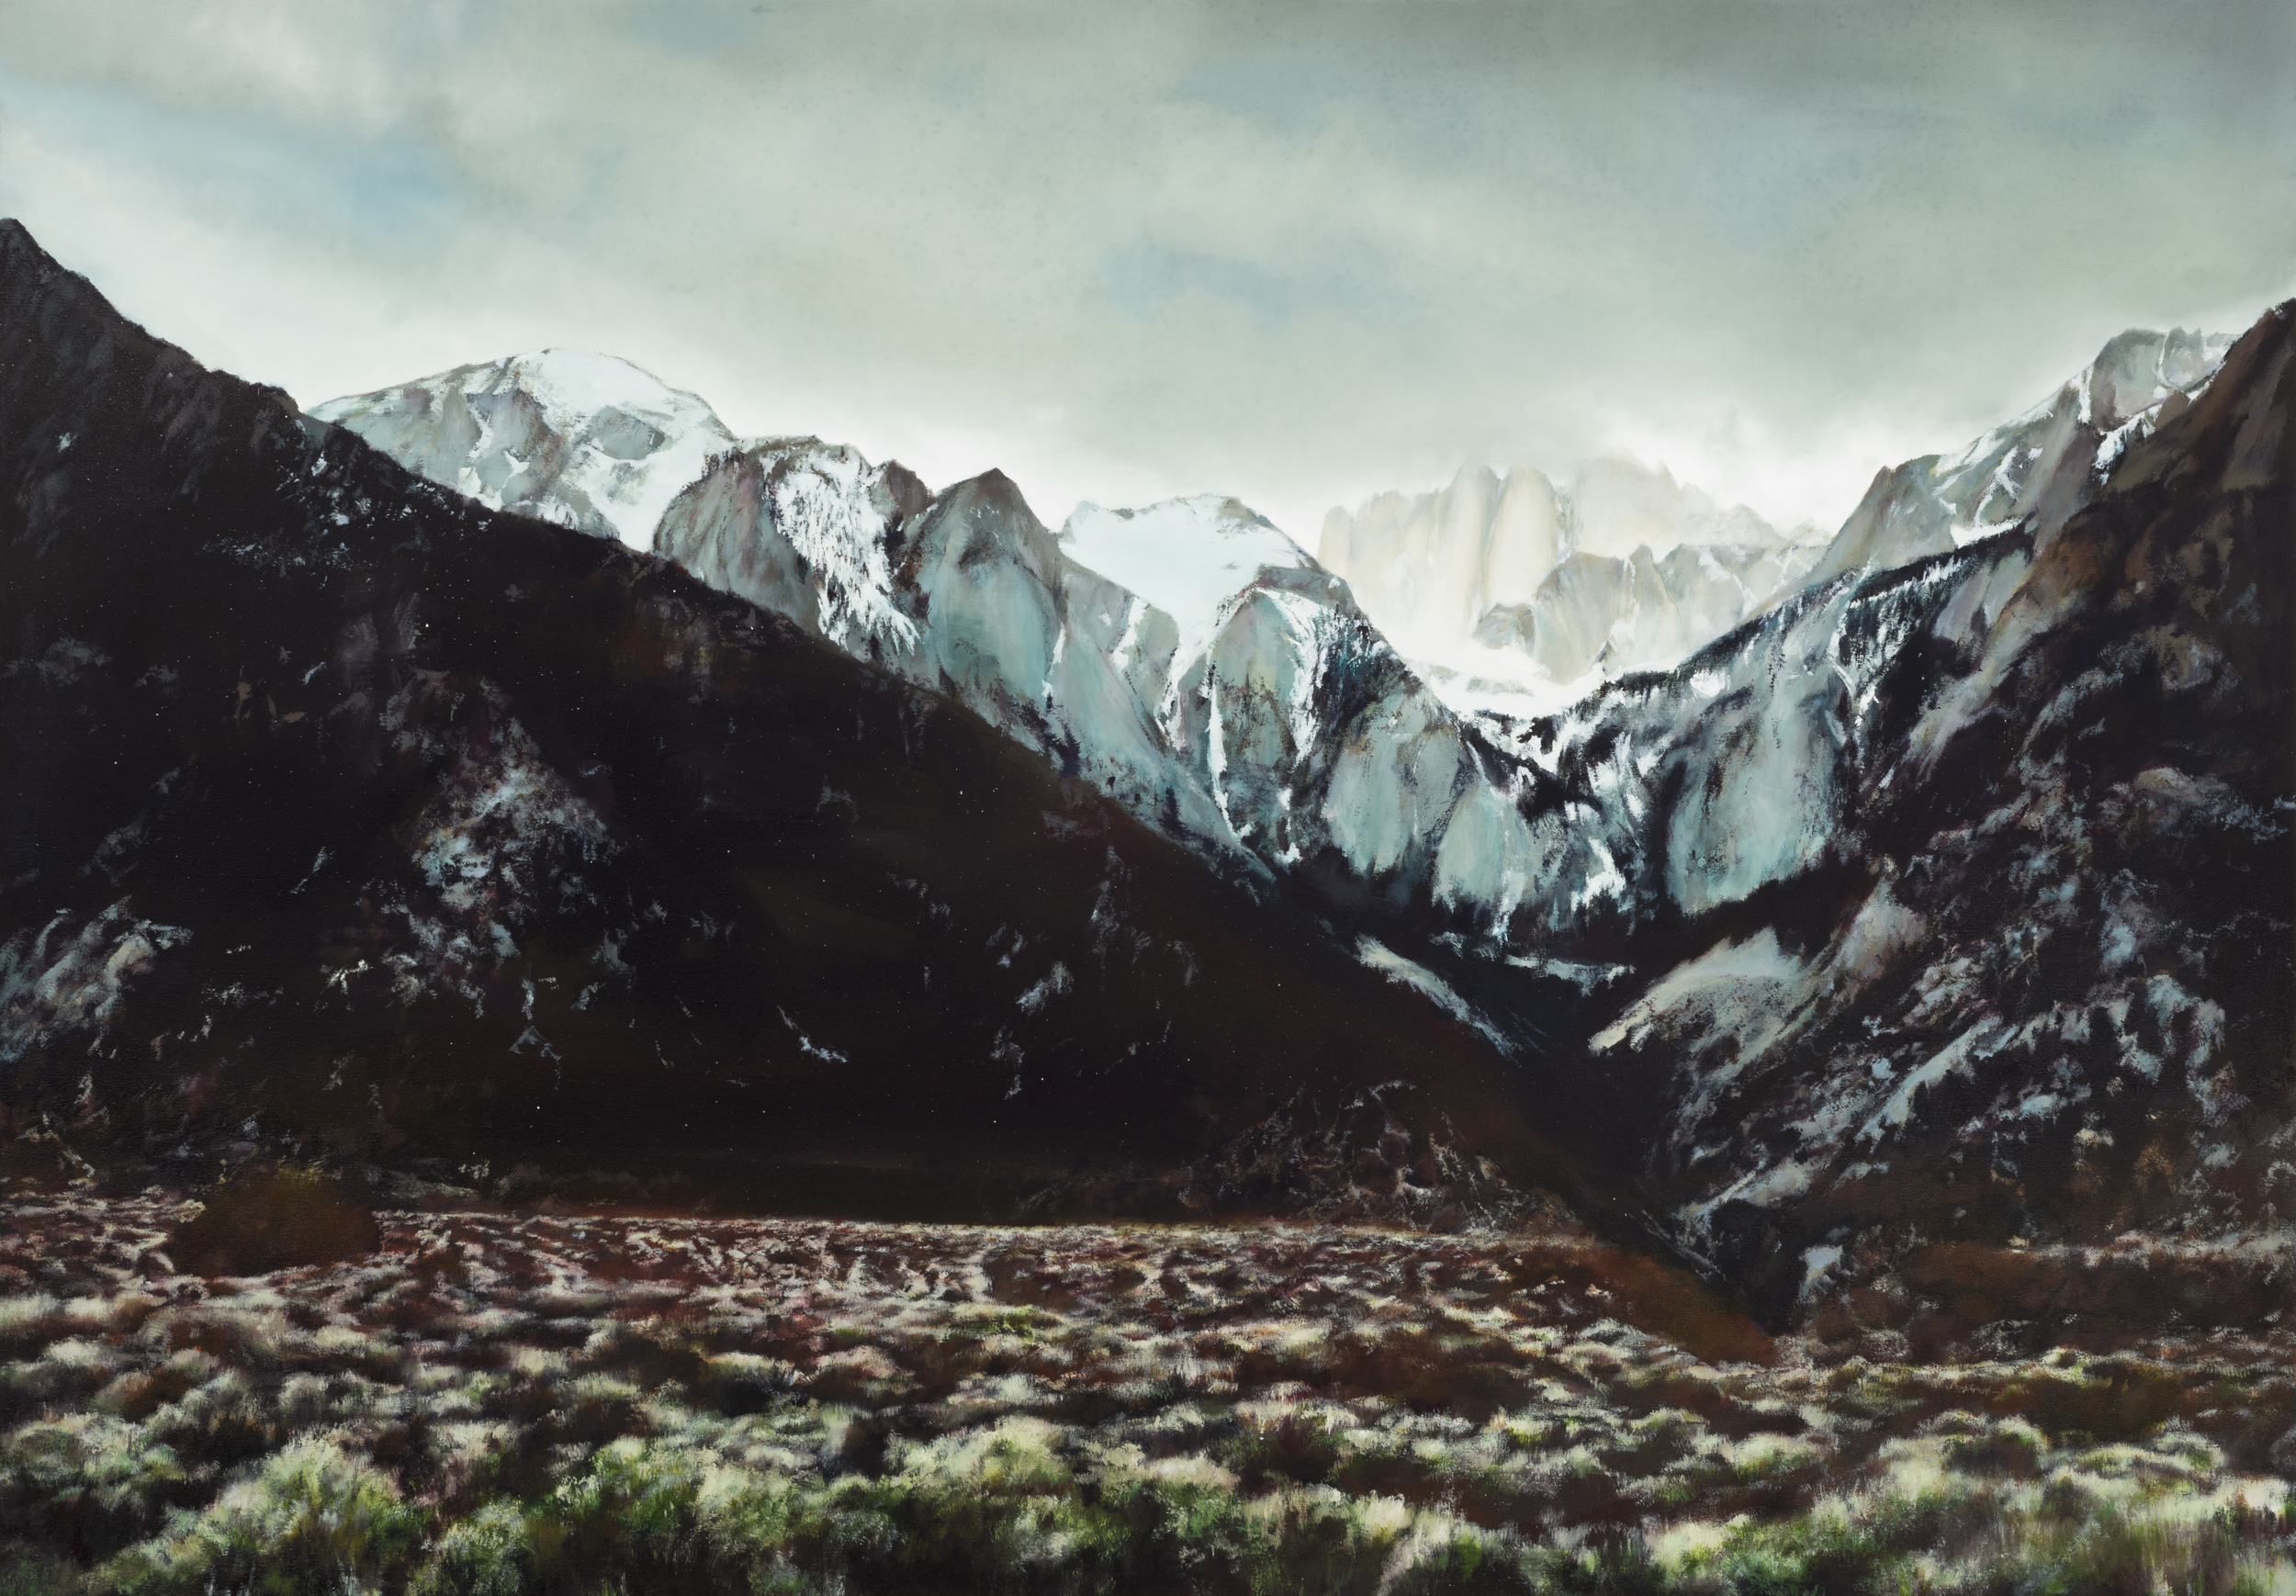   mt. whitney   40" x 62"  oil on canvas  2013    